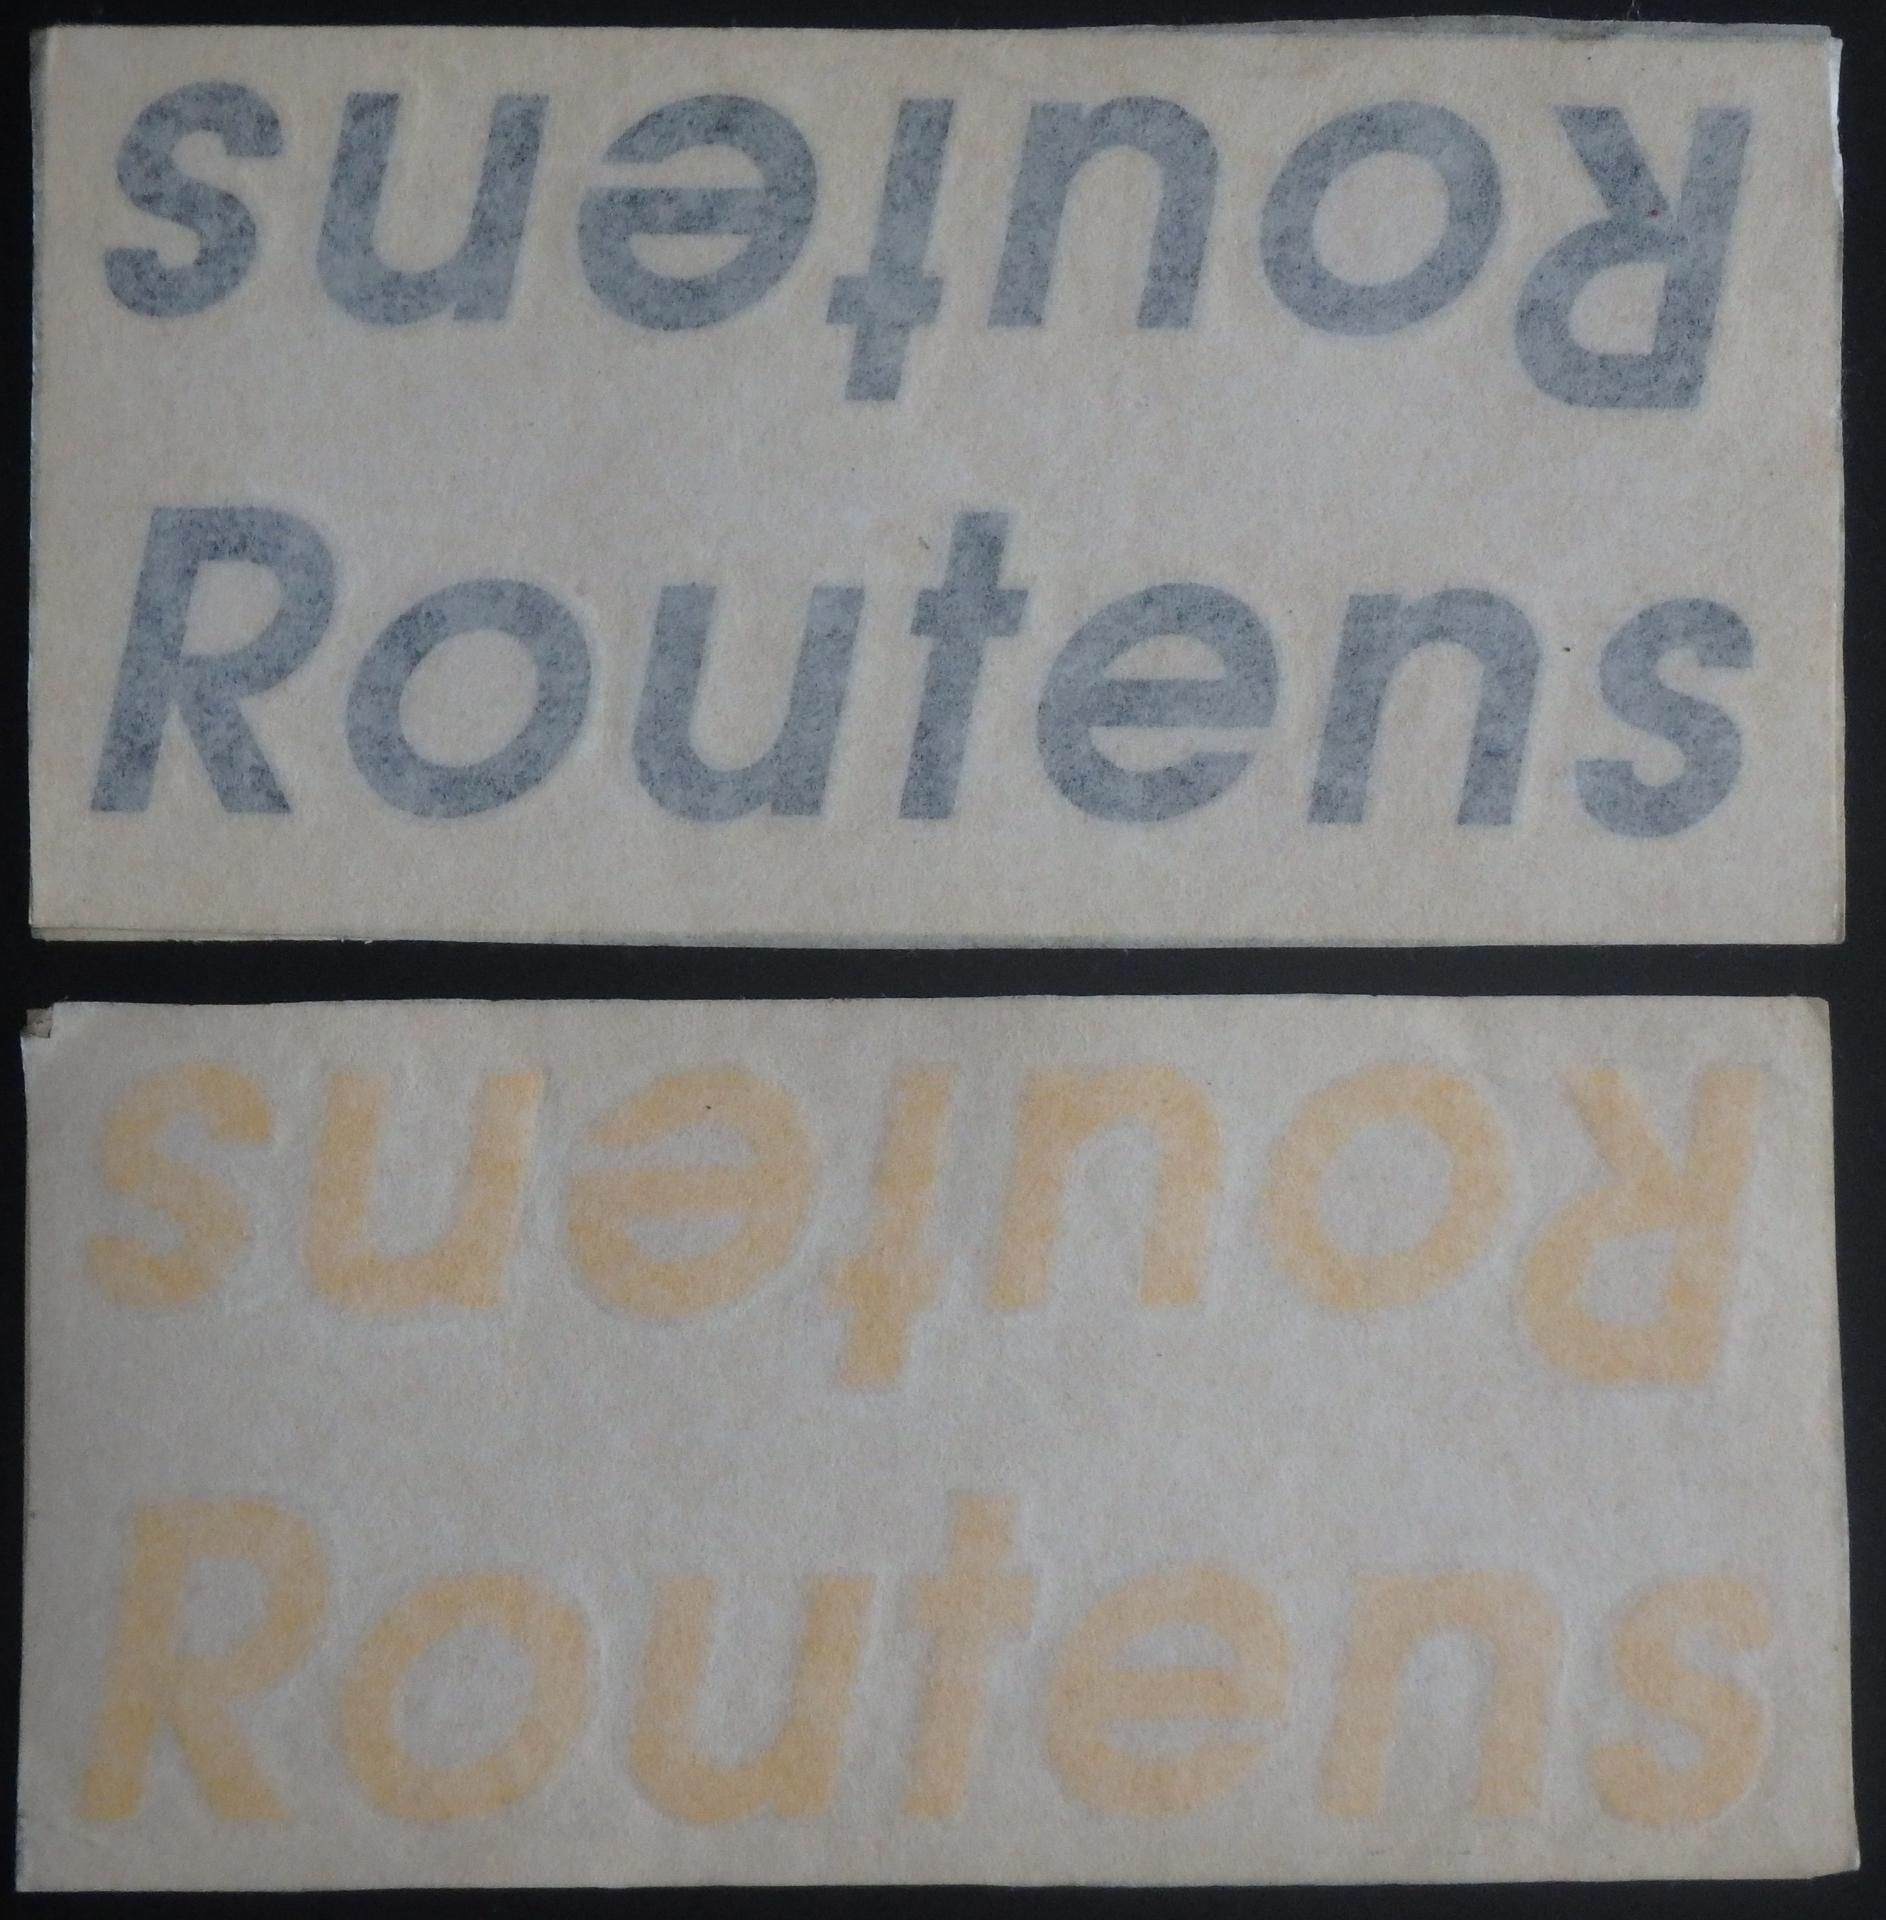 Vintage bicycle routens 12